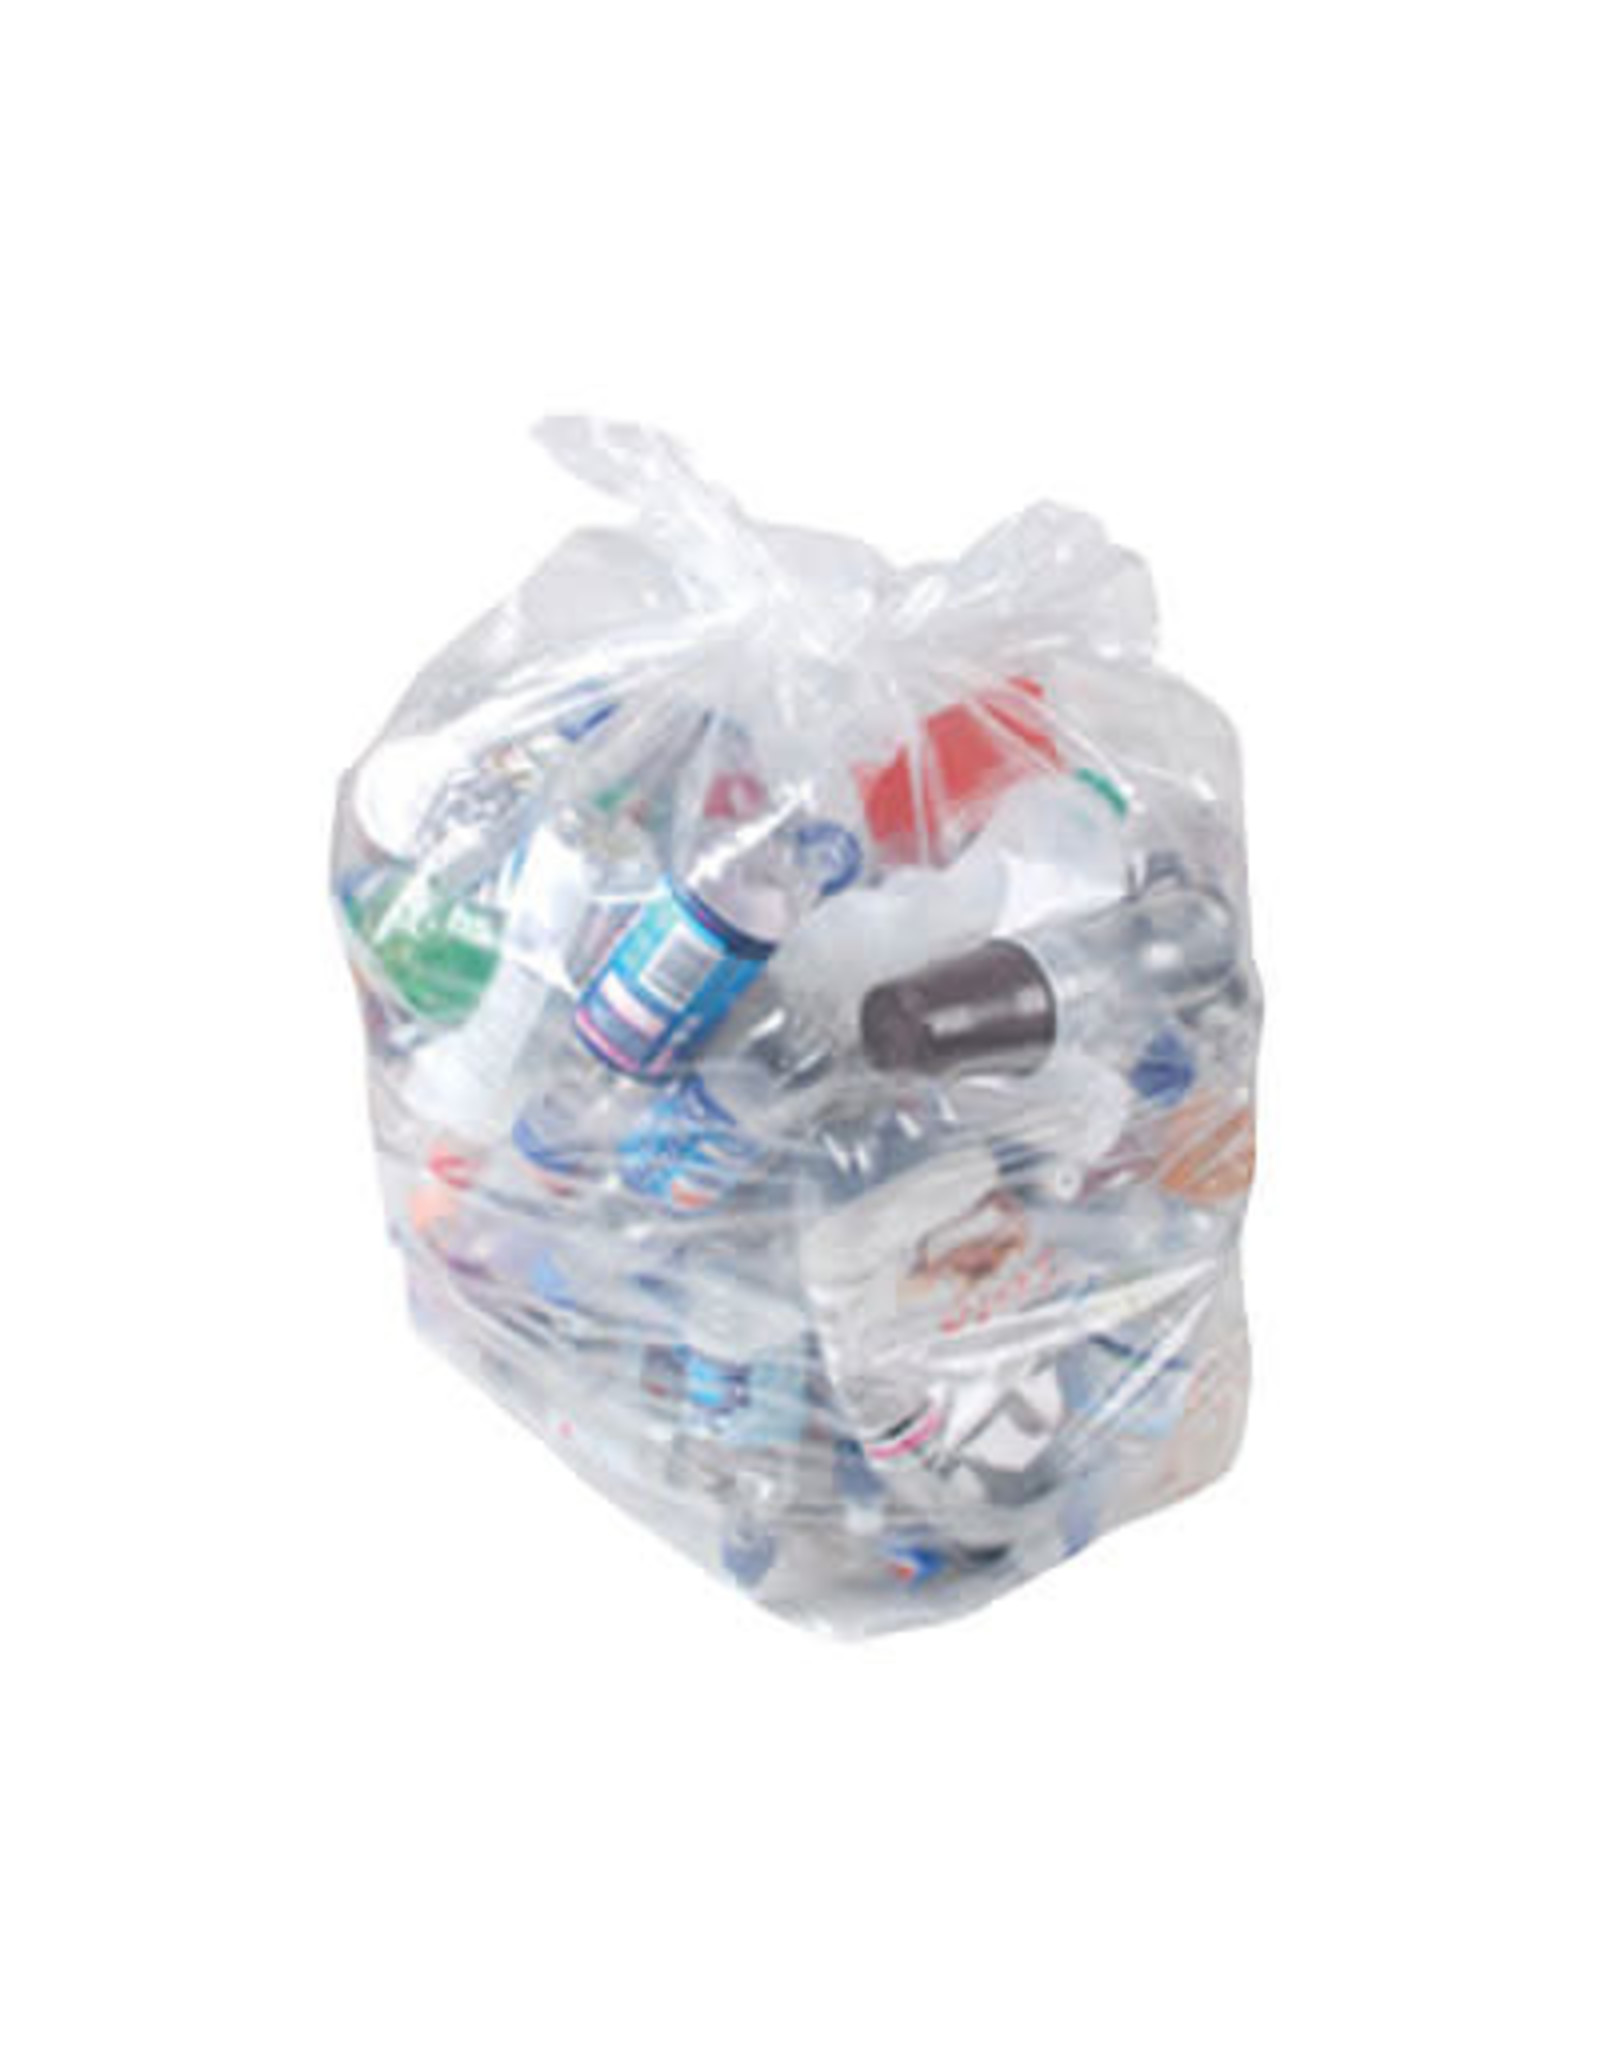 Proven 20 x 22 Clear/Regular Garbage Bags - 500/Case